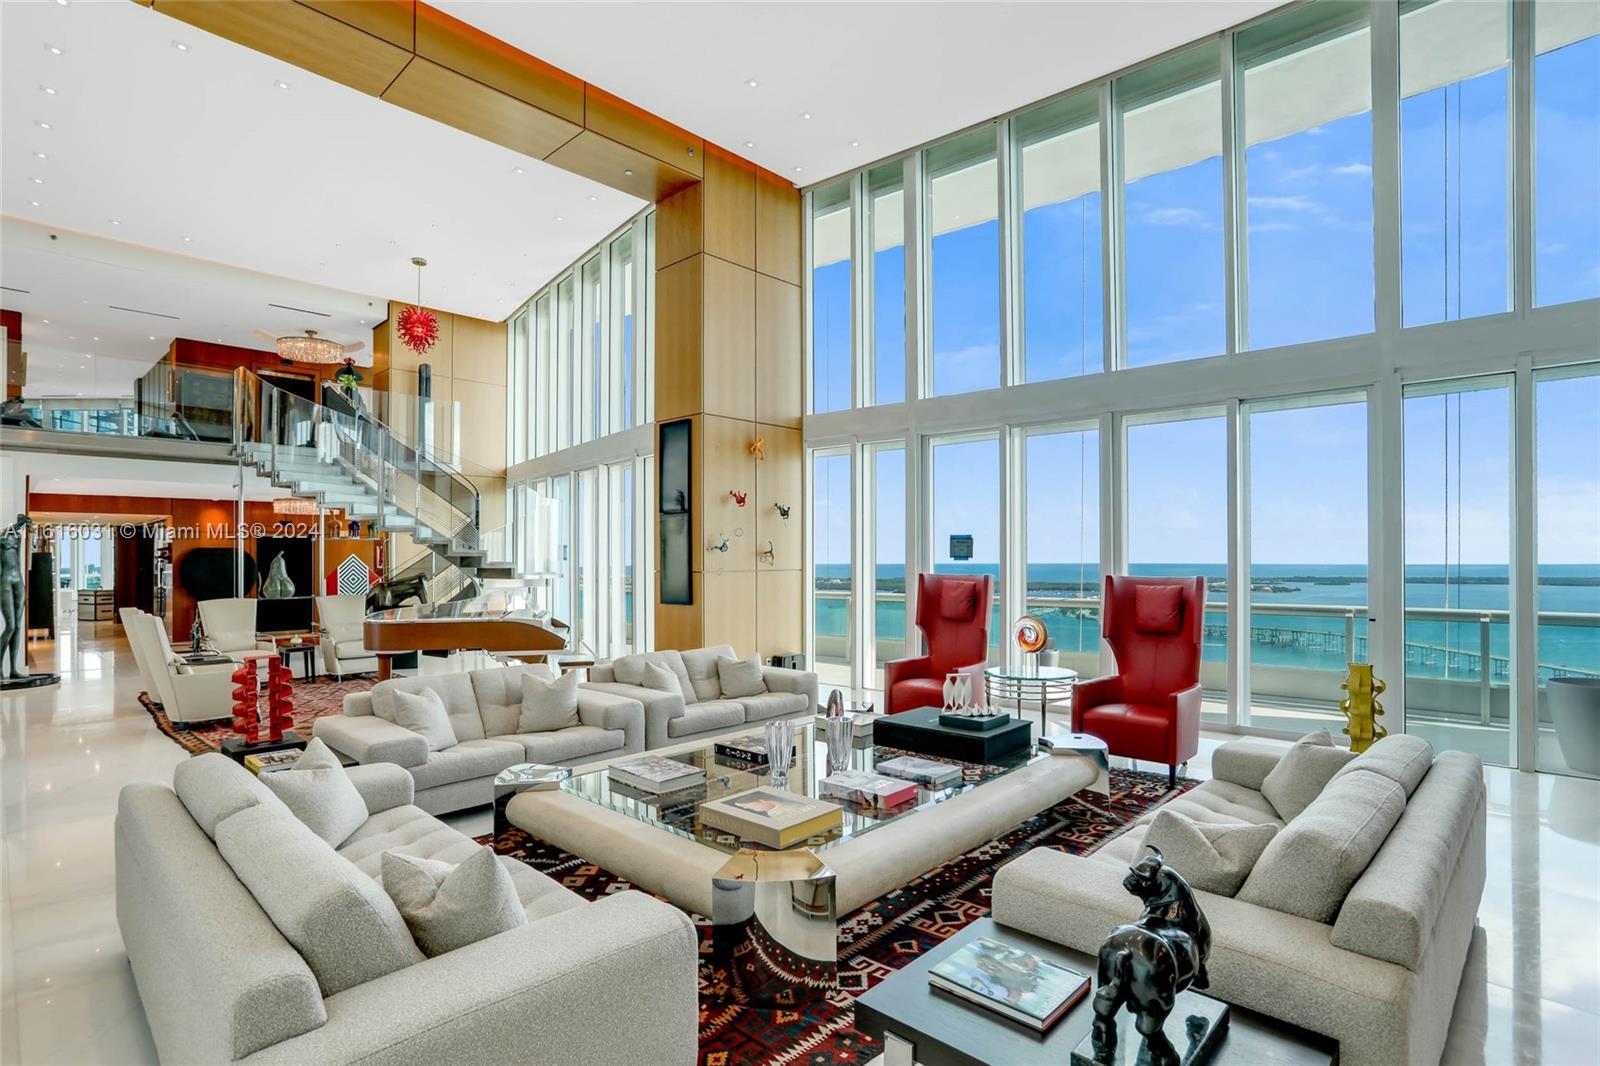 This is an absolutely gorgeous and stunning 10,000 sq. ft. duplex in the sky with 180 degree views of Biscayne Bay, Miami Beach, Fisher Island, Key Biscayne and beyond and city scape views from the west side. The terrace and pool comprise of 4394 sq. ft. alone!! Completely updated in the most exquisite taste and sophistication. All new marble floors. This is a home for the most cultured and elegant buyer. No expense was spared. Enjoy your own private pool , 4 assigned parking spaces (2063,2086,2087,2088) and storage #B-060. Marina slip #13 with dimensions 27' x 97' x 5'25'' fits up to a 90' yacht. This is a first class building offering privacy, full services and an outstanding way of life! To see it is to want it!